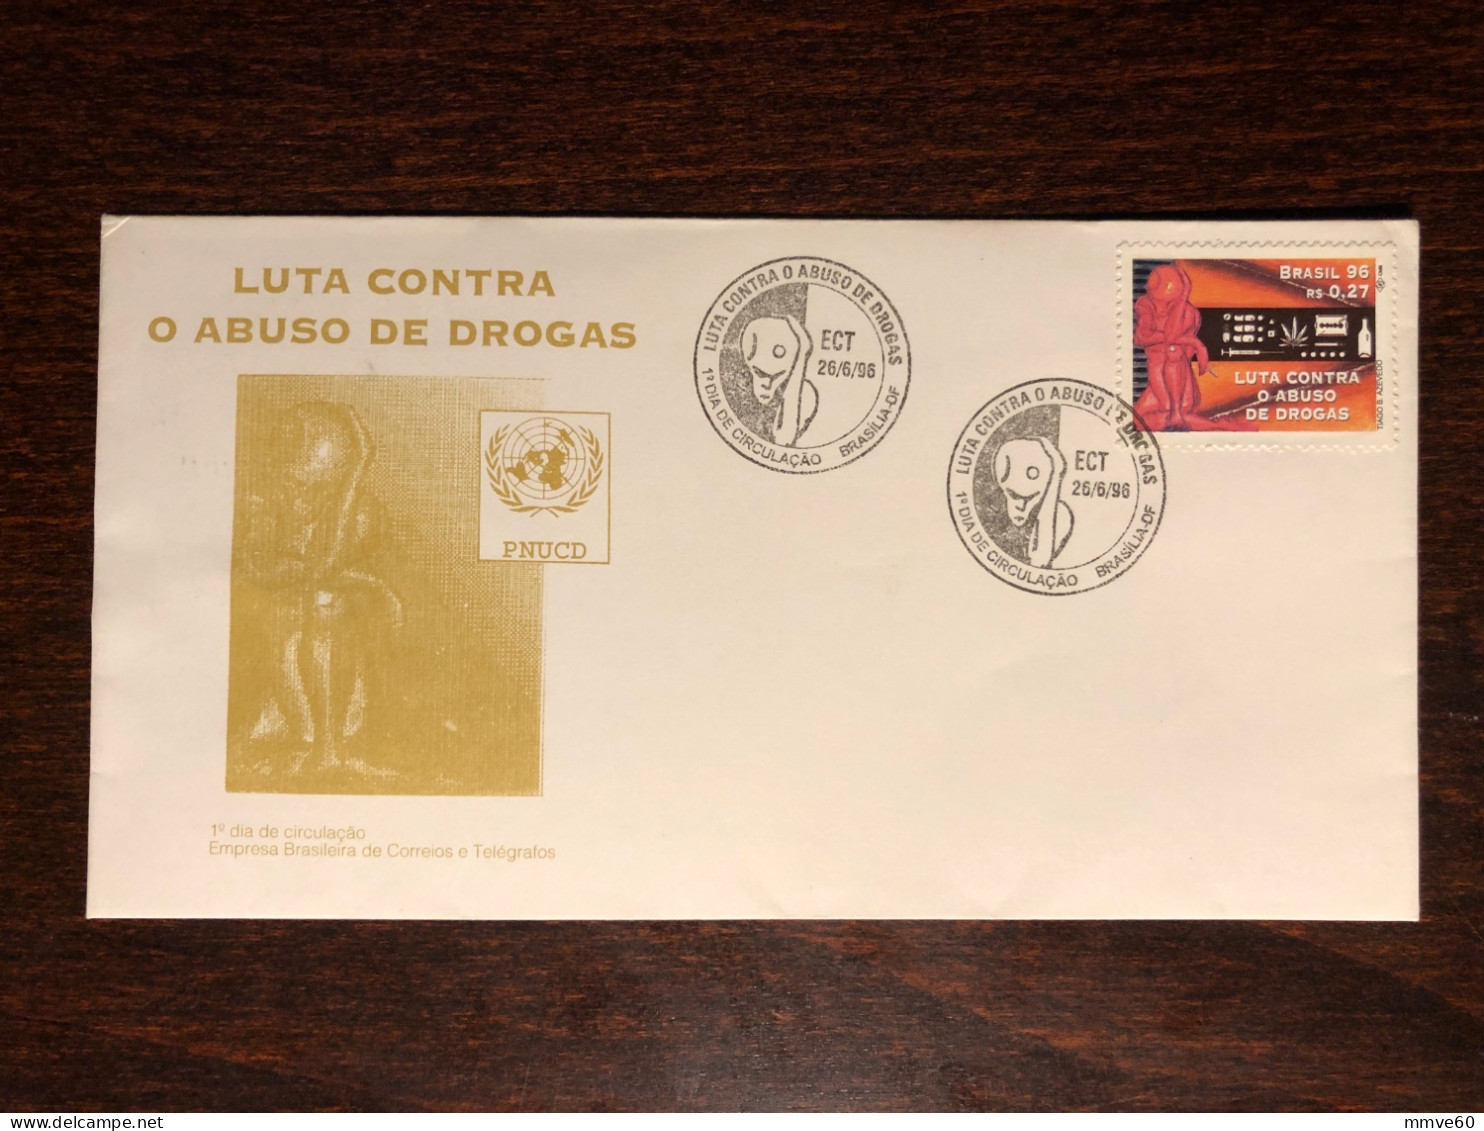 BRAZIL FDC COVER 1996 YEAR NARCOTICS DRUGS HEALTH MEDICINE STAMPS - Storia Postale